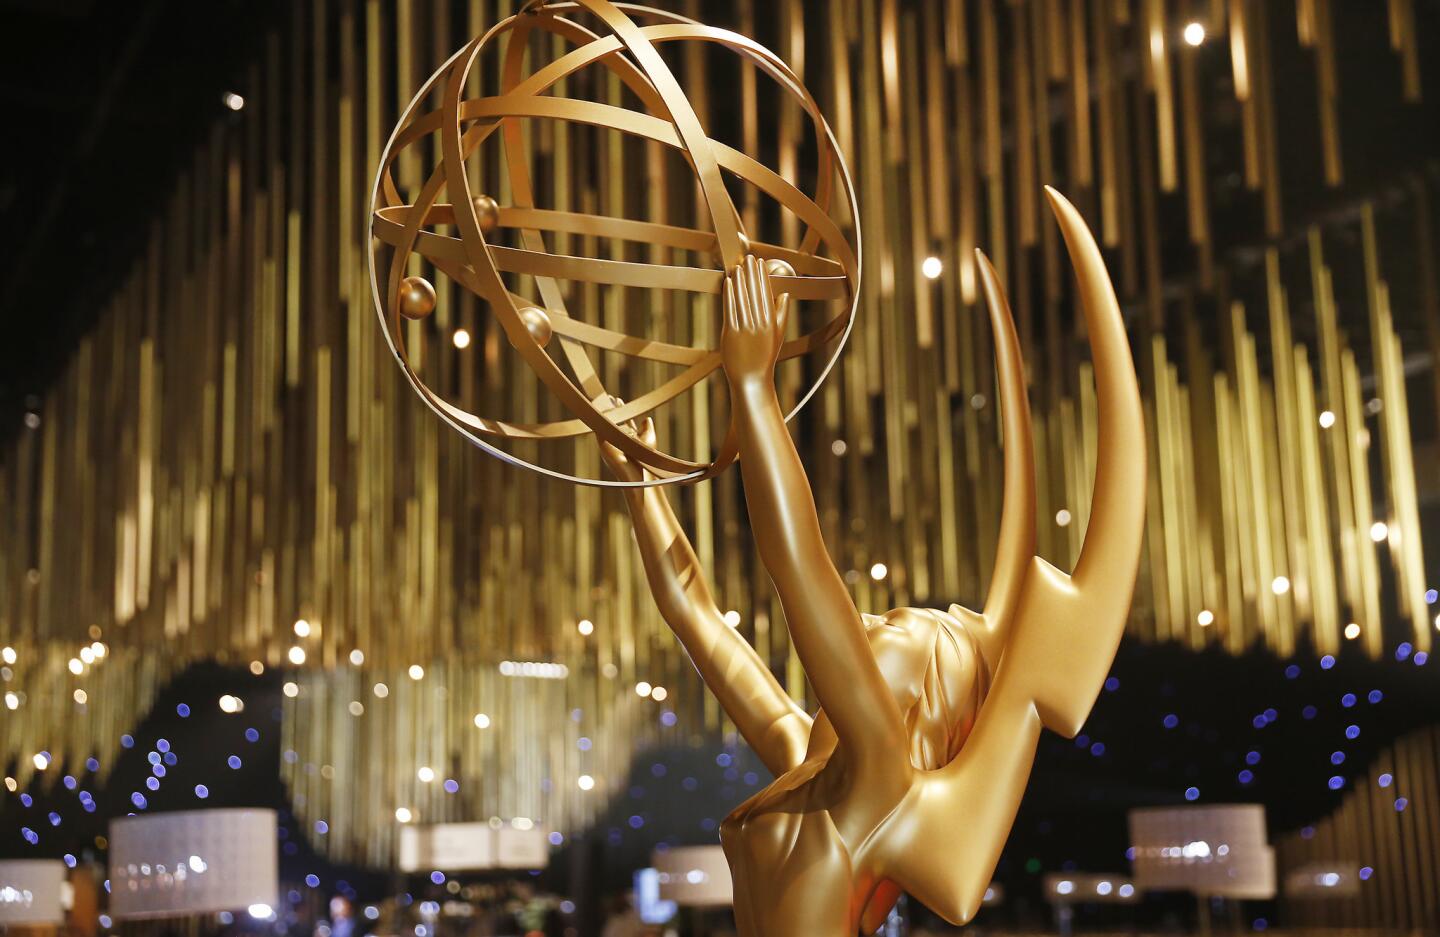 Preview of the 2017 Emmy Awards Governors Ball